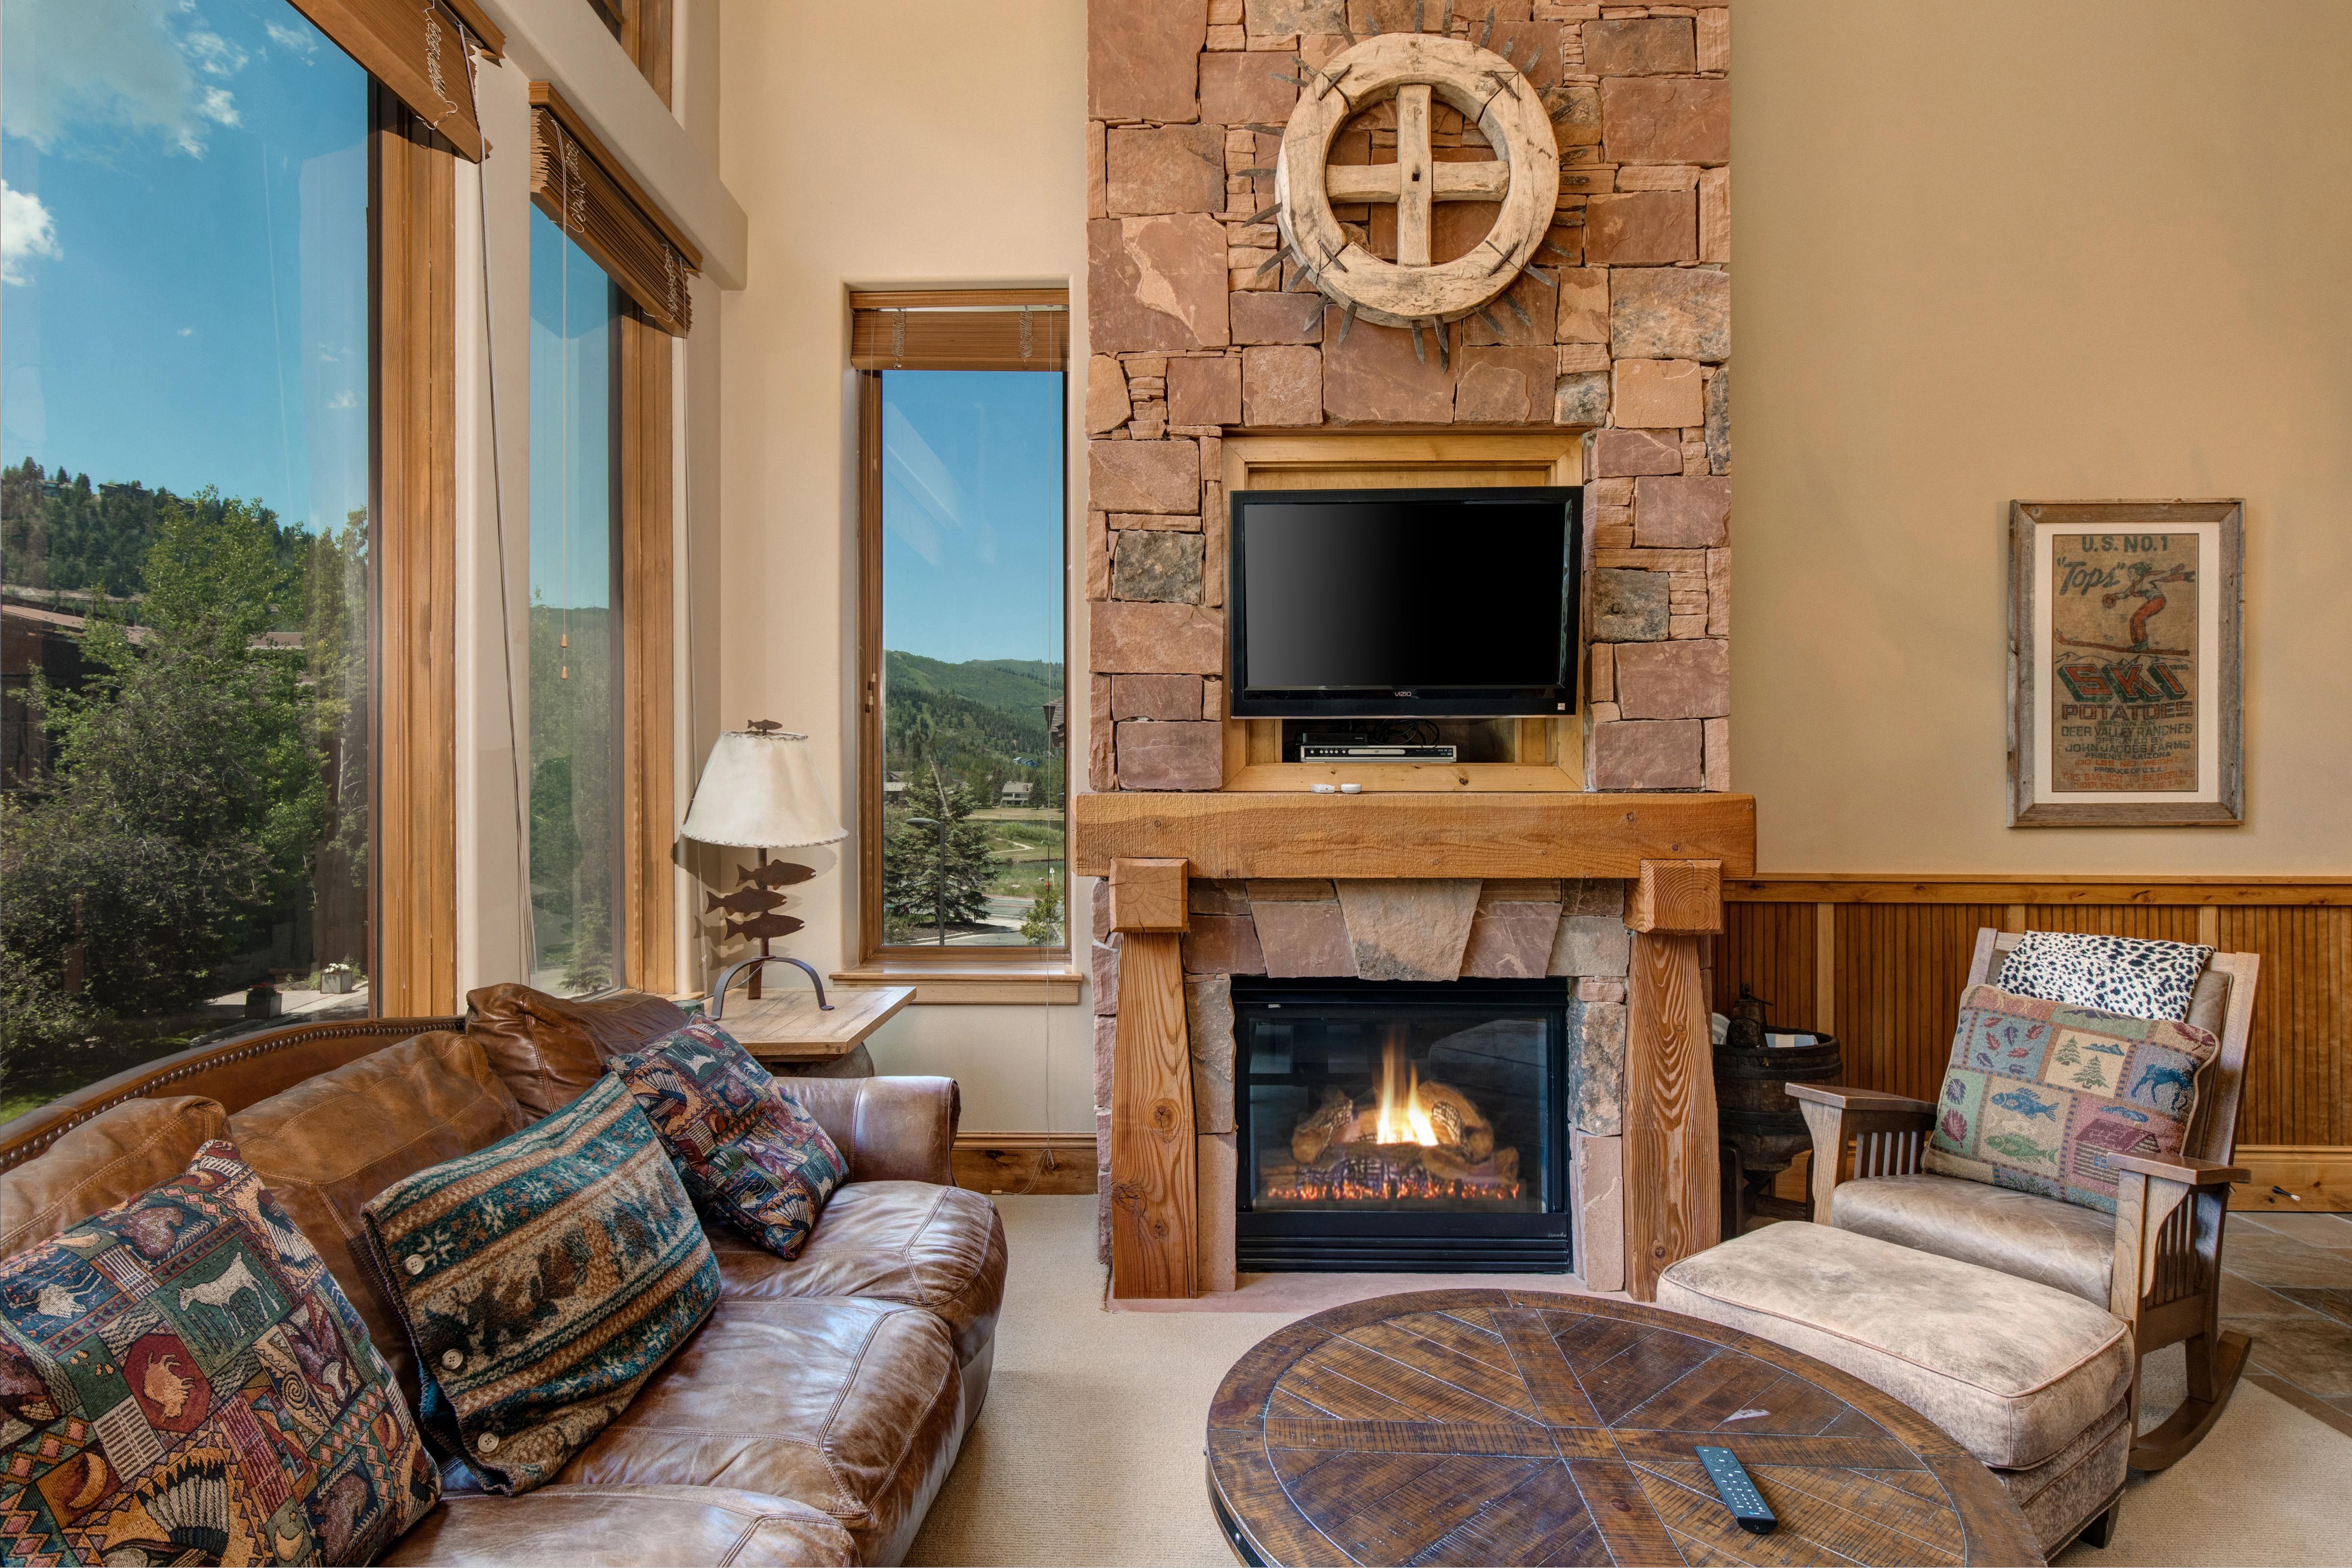 Property Image 1 - The Lodges at Deer Valley-A - #5323